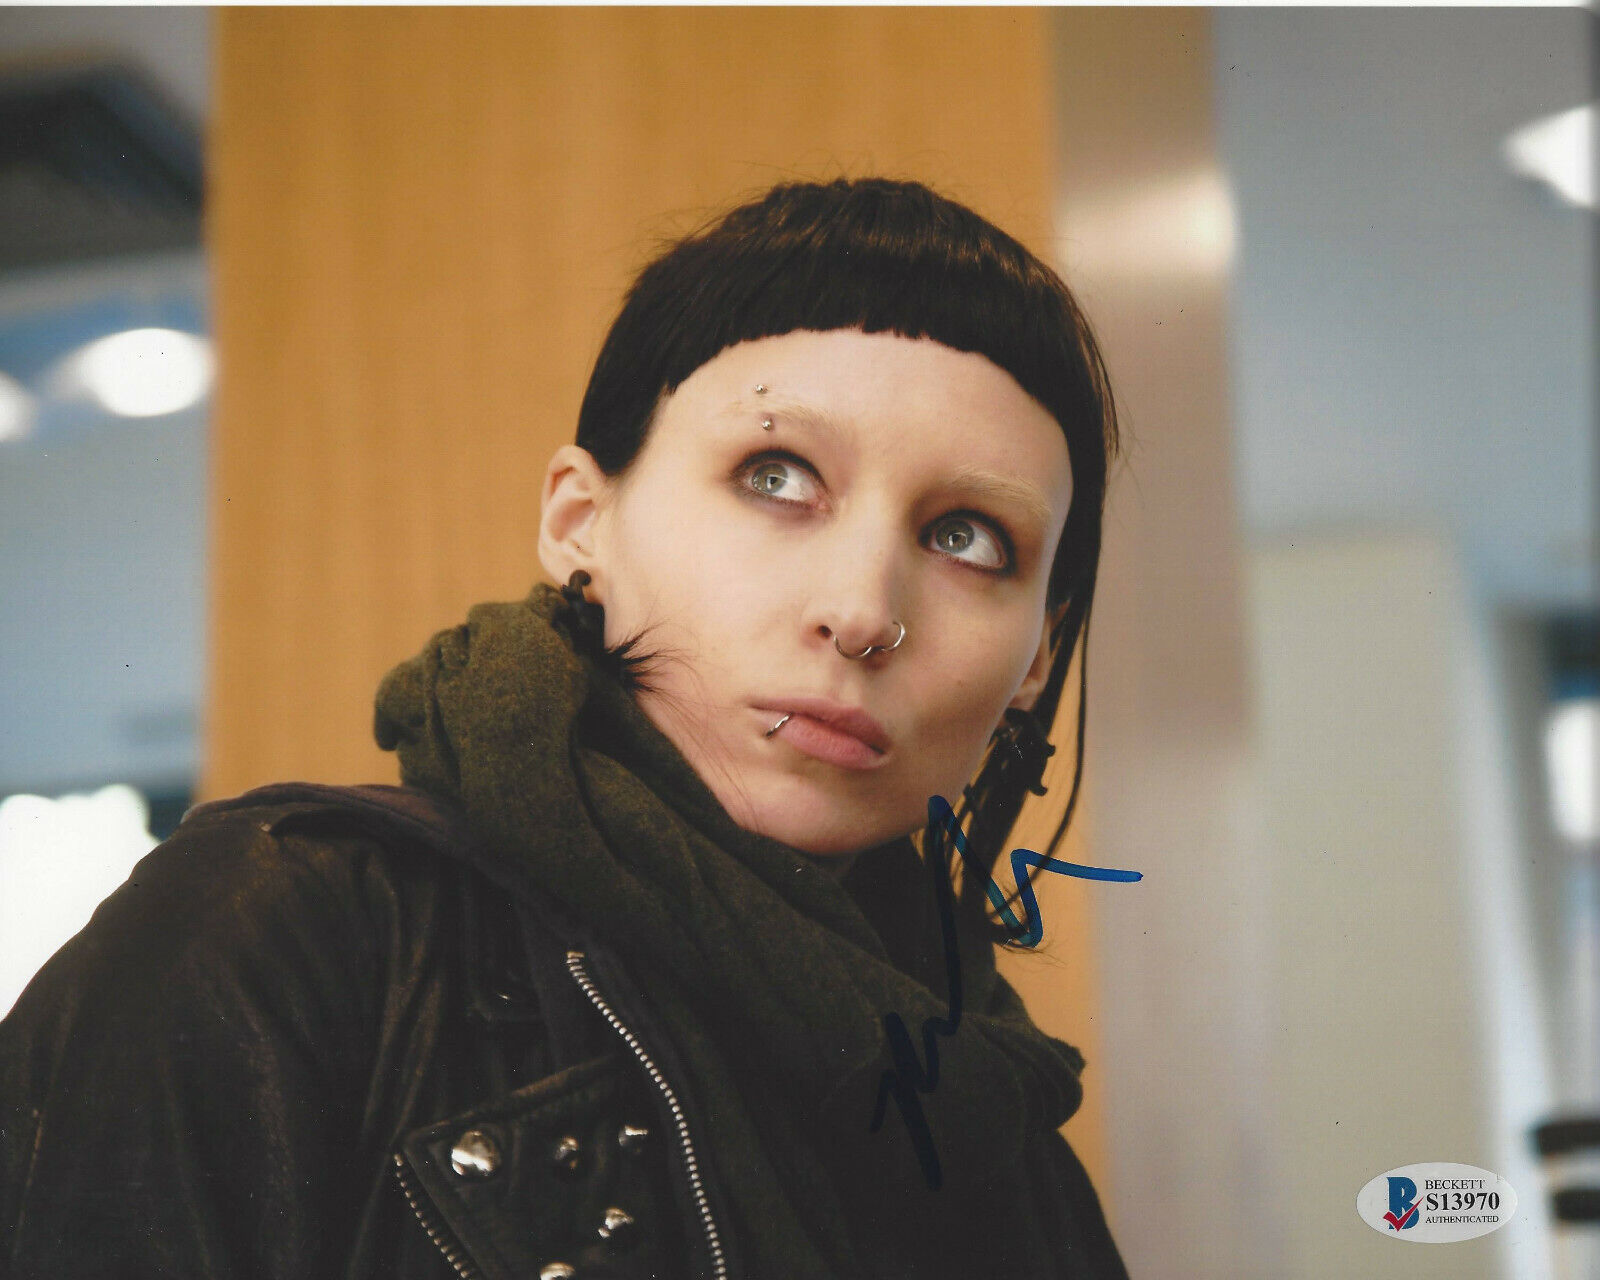 ROONEY MARA SIGNED THE GIRL WITH THE DRAGON TATTOO 8X10 Photo Poster painting 2 BECKETT COA BAS